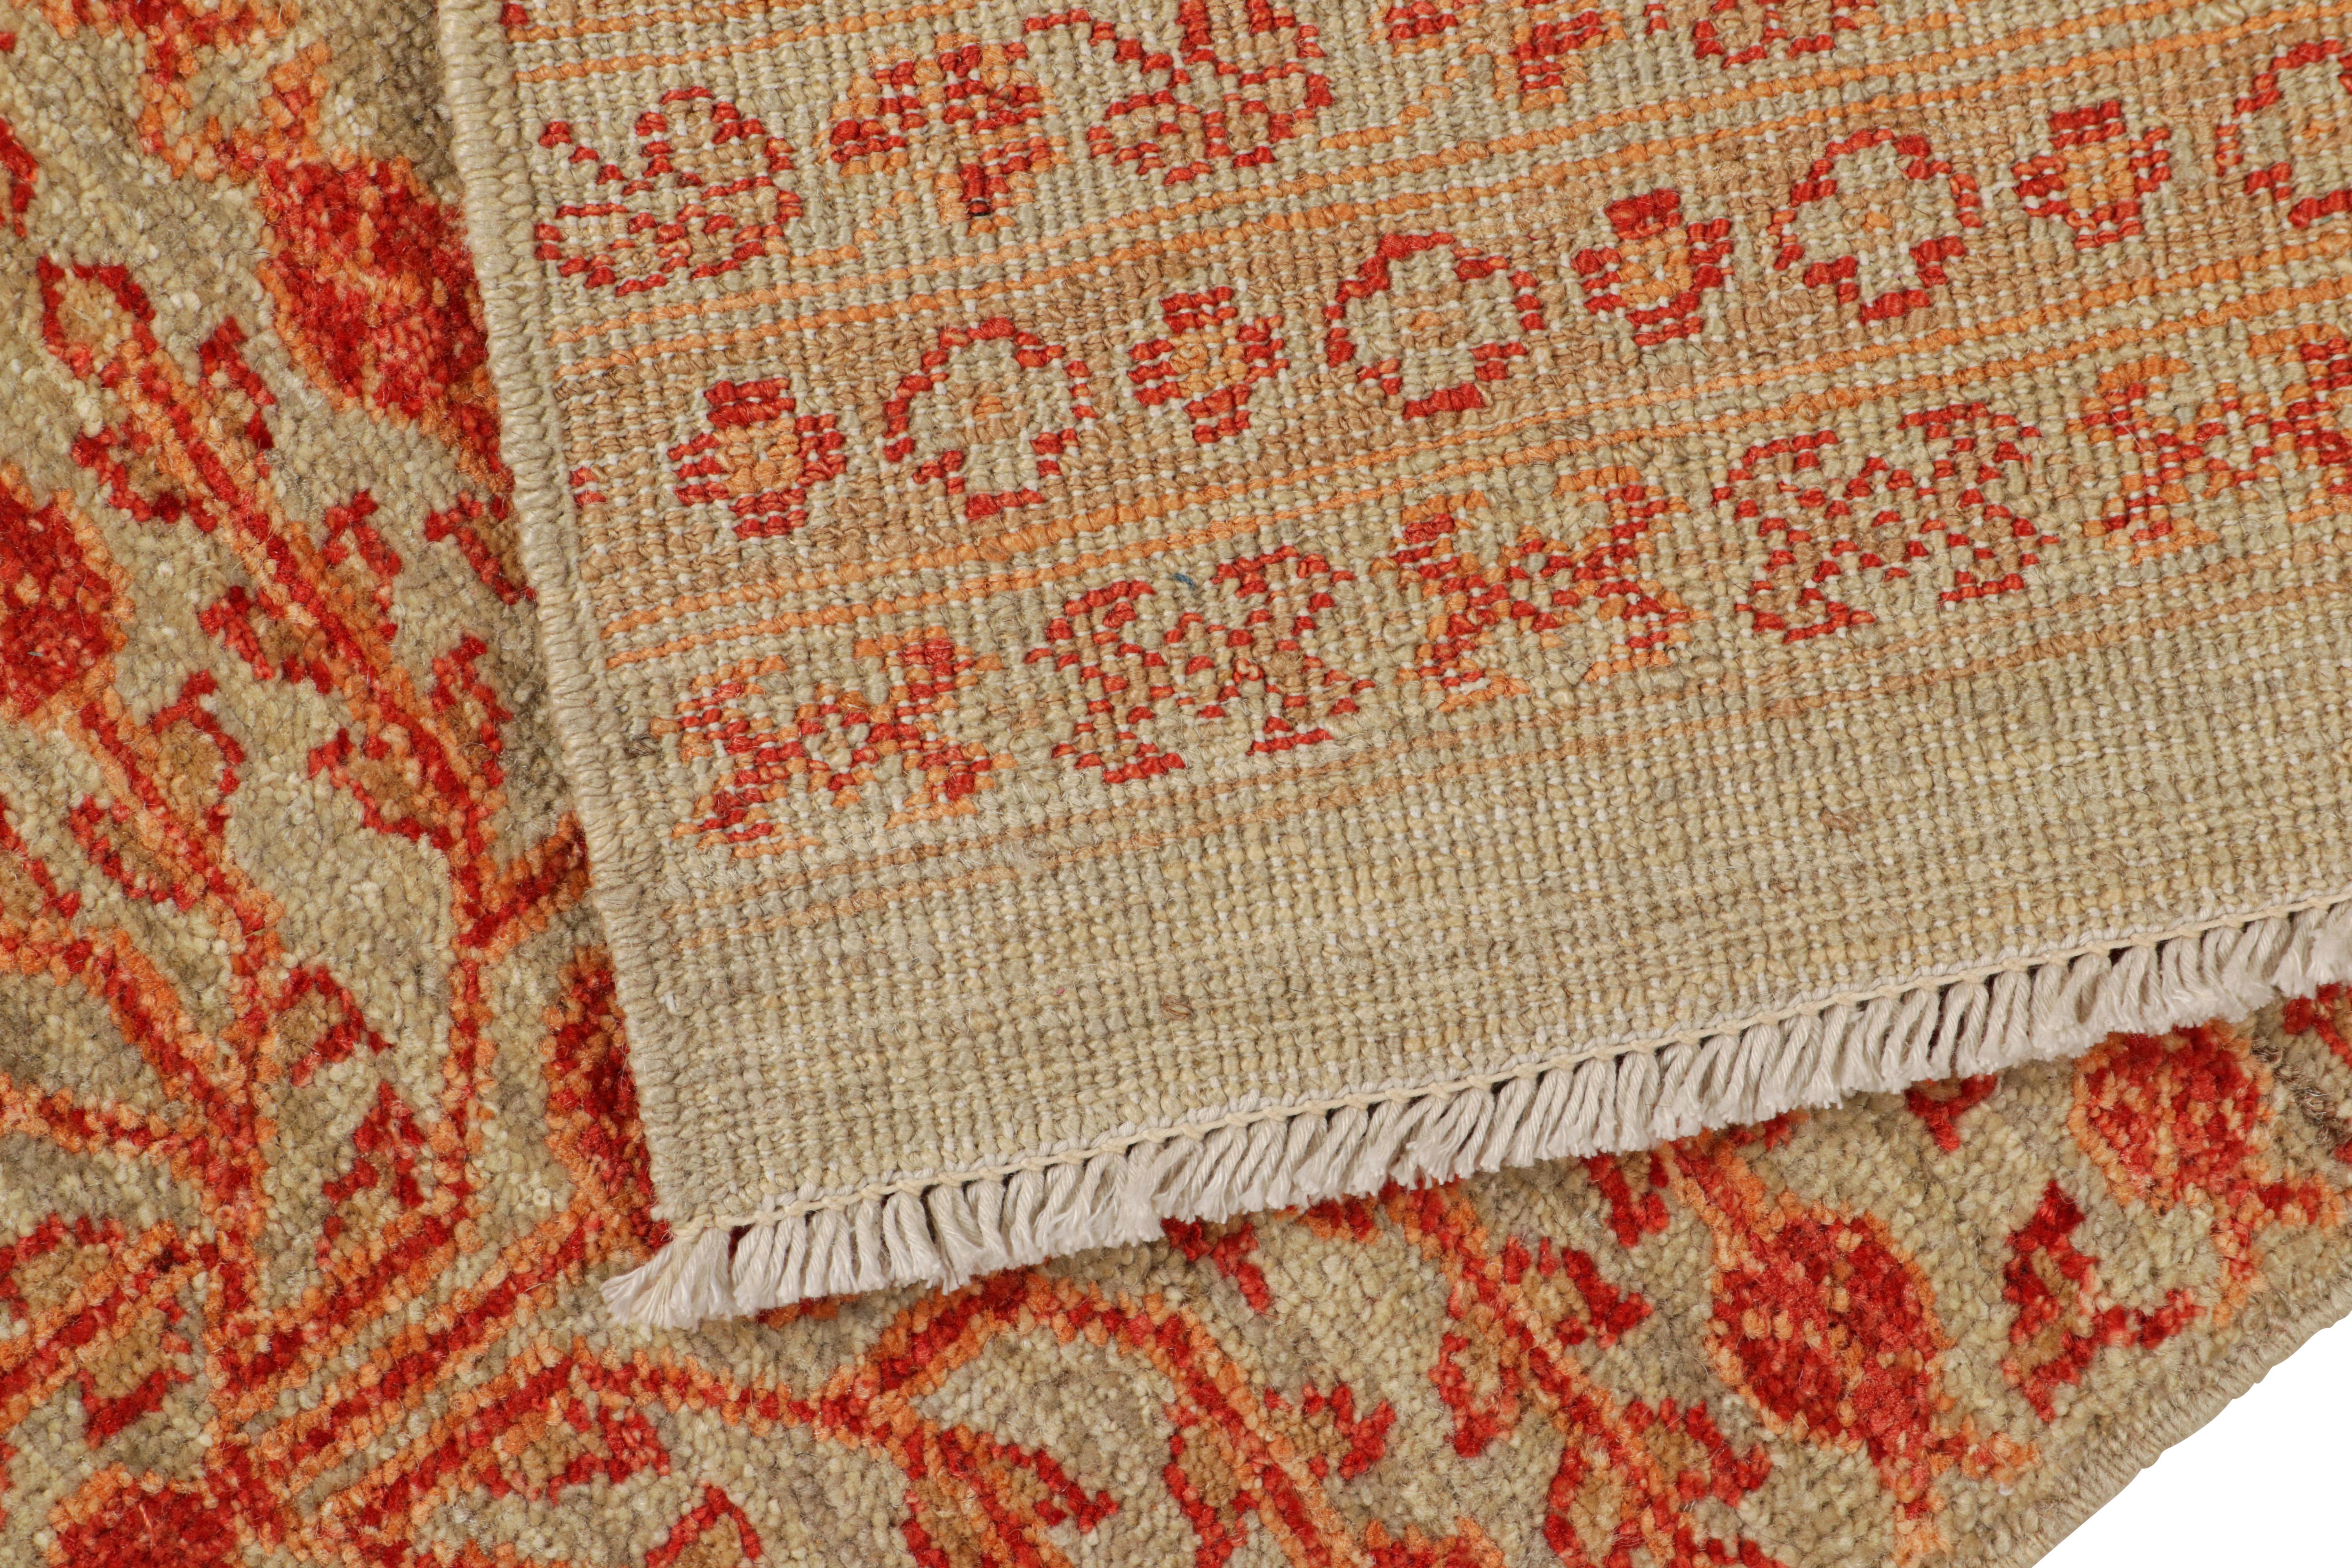 Contemporary Rug & Kilim’s Khotan Style Rug in Beige-Brown with Pomegranate Patterns For Sale